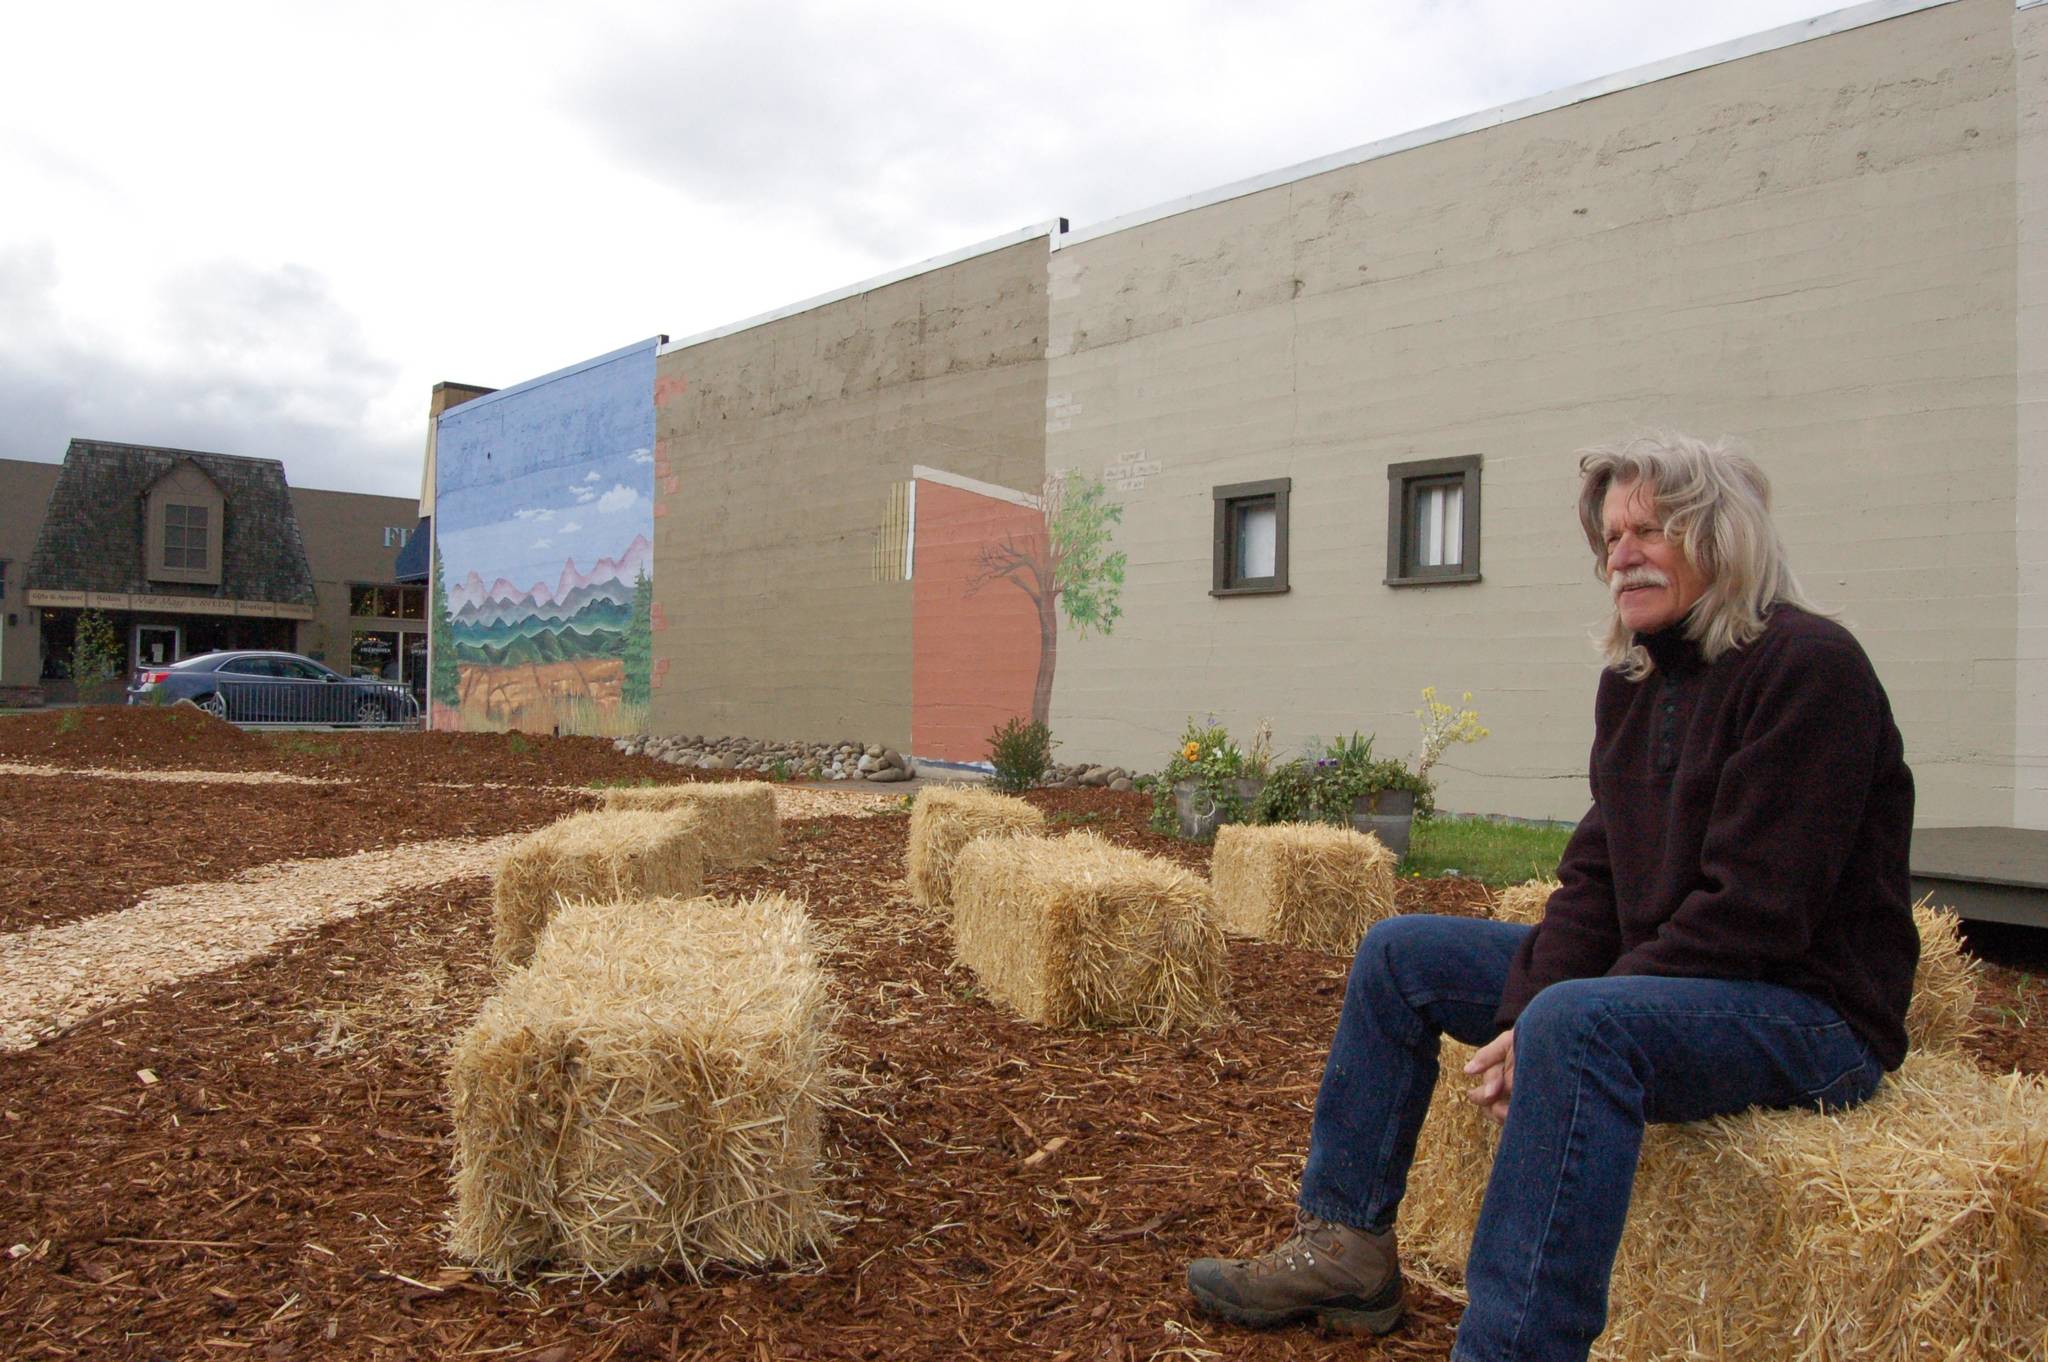 Ken Stringer, head organizer of Whimsy Park, sits on one of the straw bales installed at the new temporary park located on East Washington Street between Jose’s Famous Salsa and The Rusting Rooster in Sequim. (Erin Hawkins/Olympic Peninsula News Group)